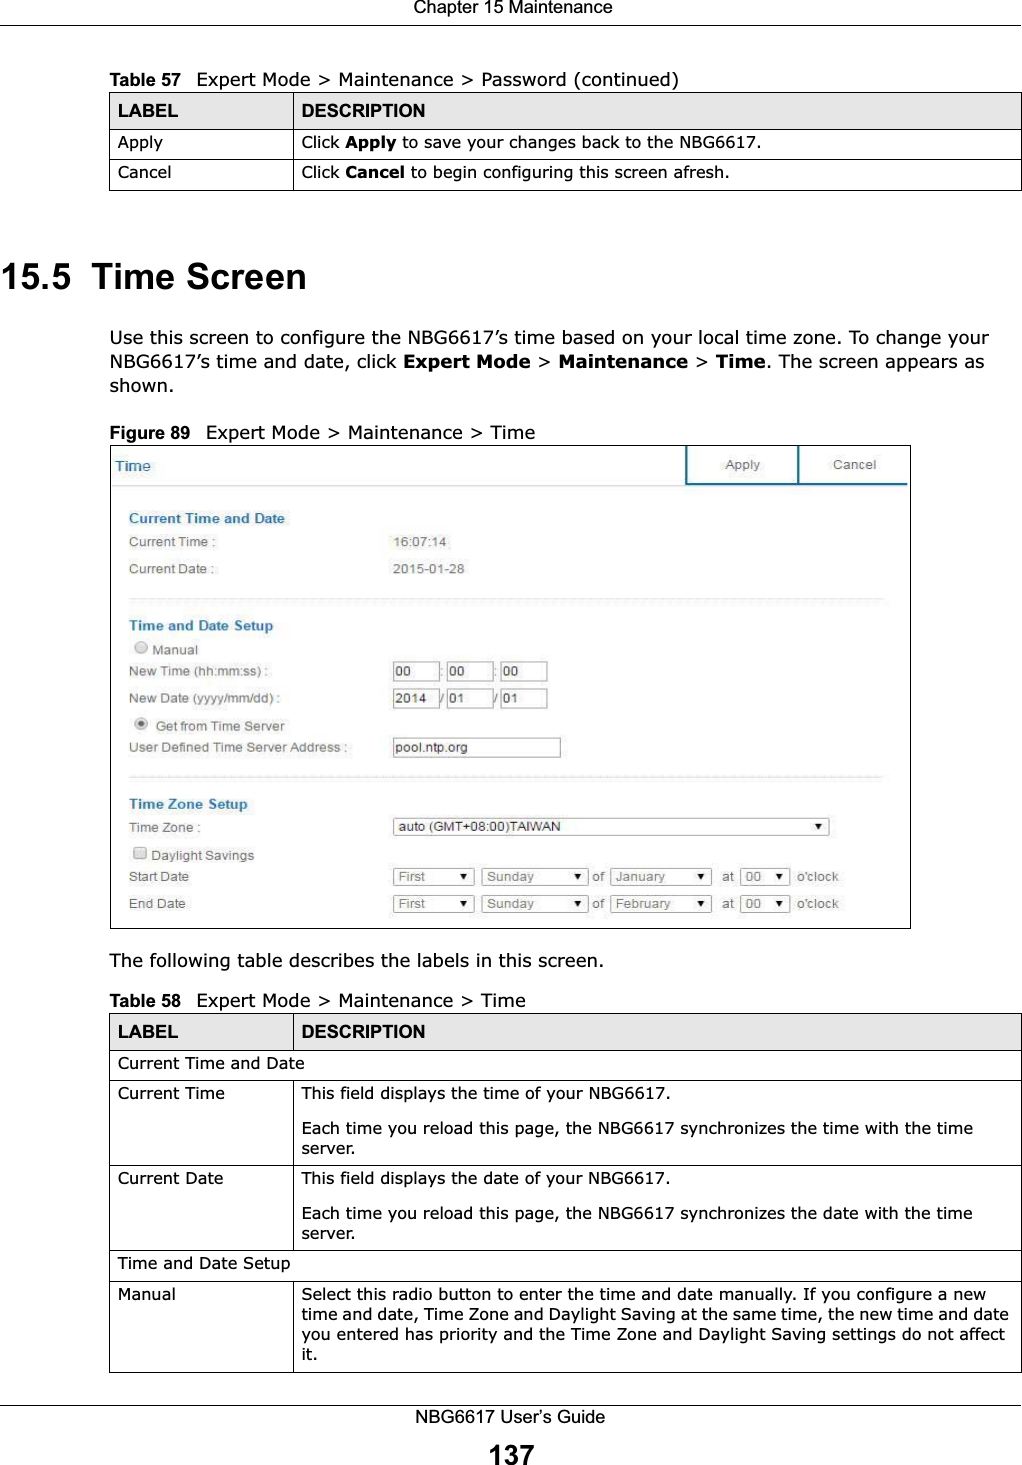  Chapter 15 MaintenanceNBG6617 User’s Guide13715.5  Time ScreenUse this screen to configure the NBG6617’s time based on your local time zone. To change your NBG6617’s time and date, click Expert Mode &gt; Maintenance &gt; Time. The screen appears as shown. Figure 89   Expert Mode &gt; Maintenance &gt; Time The following table describes the labels in this screen.Apply Click Apply to save your changes back to the NBG6617.Cancel Click Cancel to begin configuring this screen afresh.Table 57   Expert Mode &gt; Maintenance &gt; Password (continued)LABEL DESCRIPTIONTable 58   Expert Mode &gt; Maintenance &gt; Time  LABEL DESCRIPTIONCurrent Time and DateCurrent Time  This field displays the time of your NBG6617.Each time you reload this page, the NBG6617 synchronizes the time with the time server.Current Date  This field displays the date of your NBG6617. Each time you reload this page, the NBG6617 synchronizes the date with the time server.Time and Date SetupManual Select this radio button to enter the time and date manually. If you configure a new time and date, Time Zone and Daylight Saving at the same time, the new time and date you entered has priority and the Time Zone and Daylight Saving settings do not affect it.